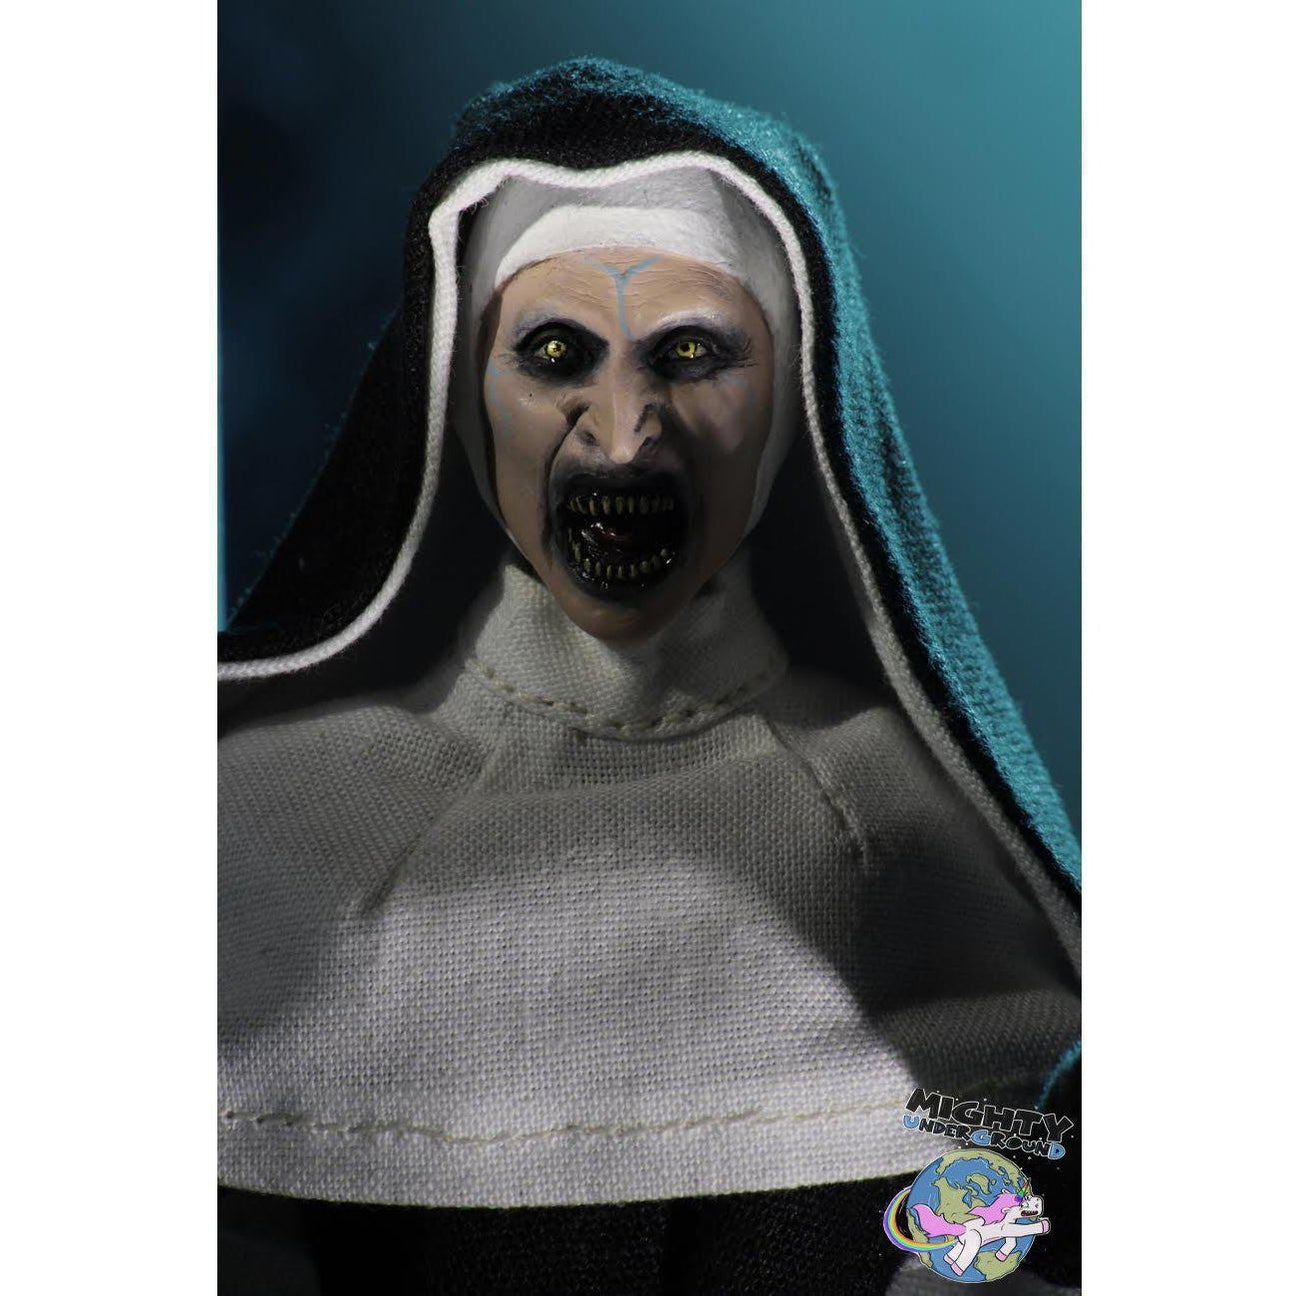 The Conjuring: The Nun - Clothed 8 inch-Actionfiguren-NECA-mighty-underground